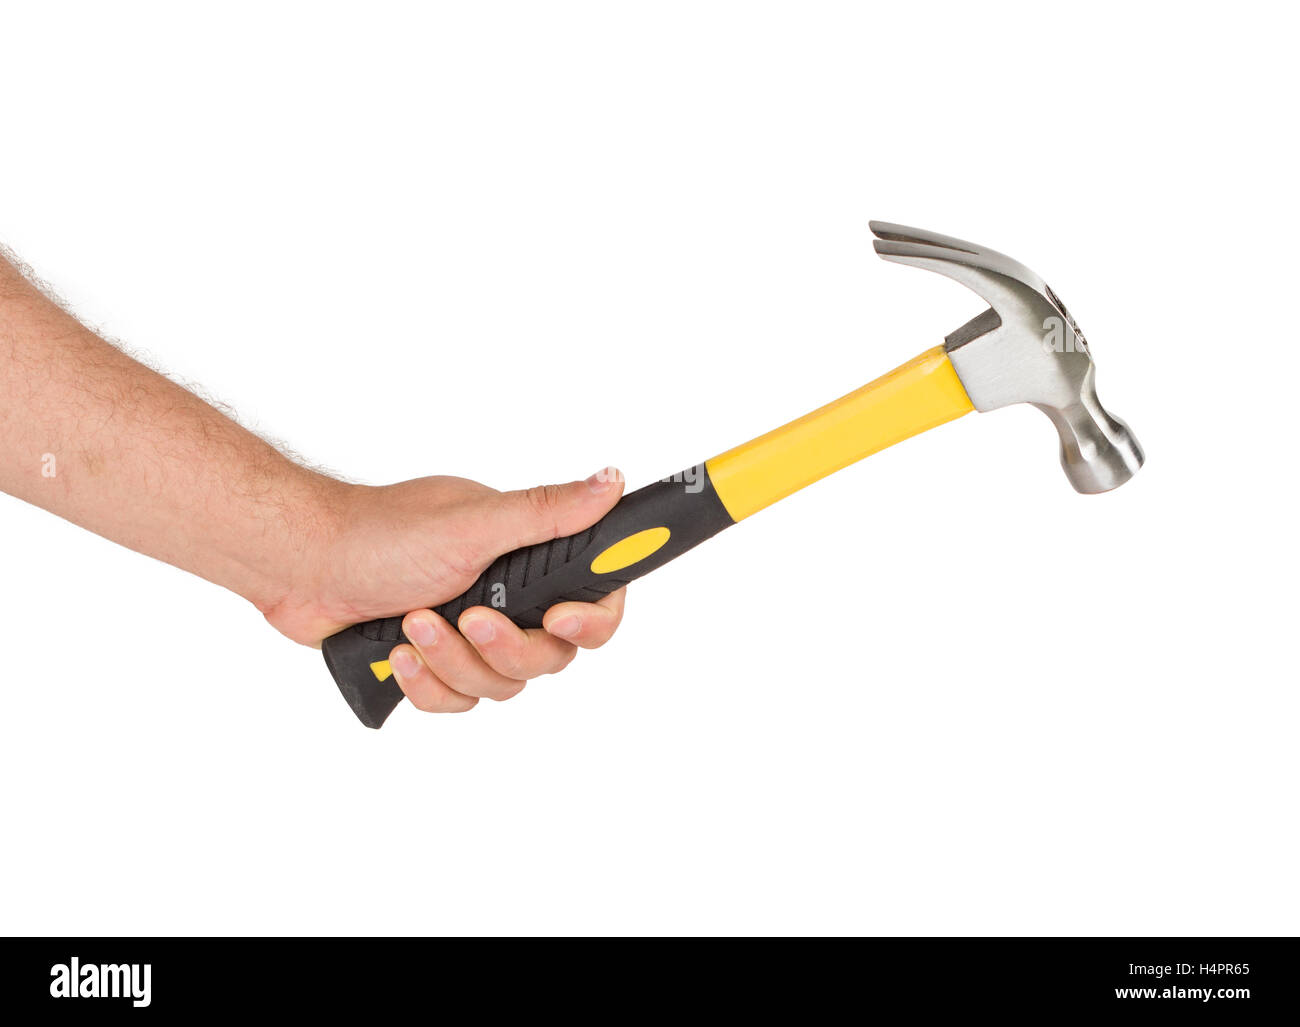 Brown Hammer High Resolution Stock Photography and Images - Alamy